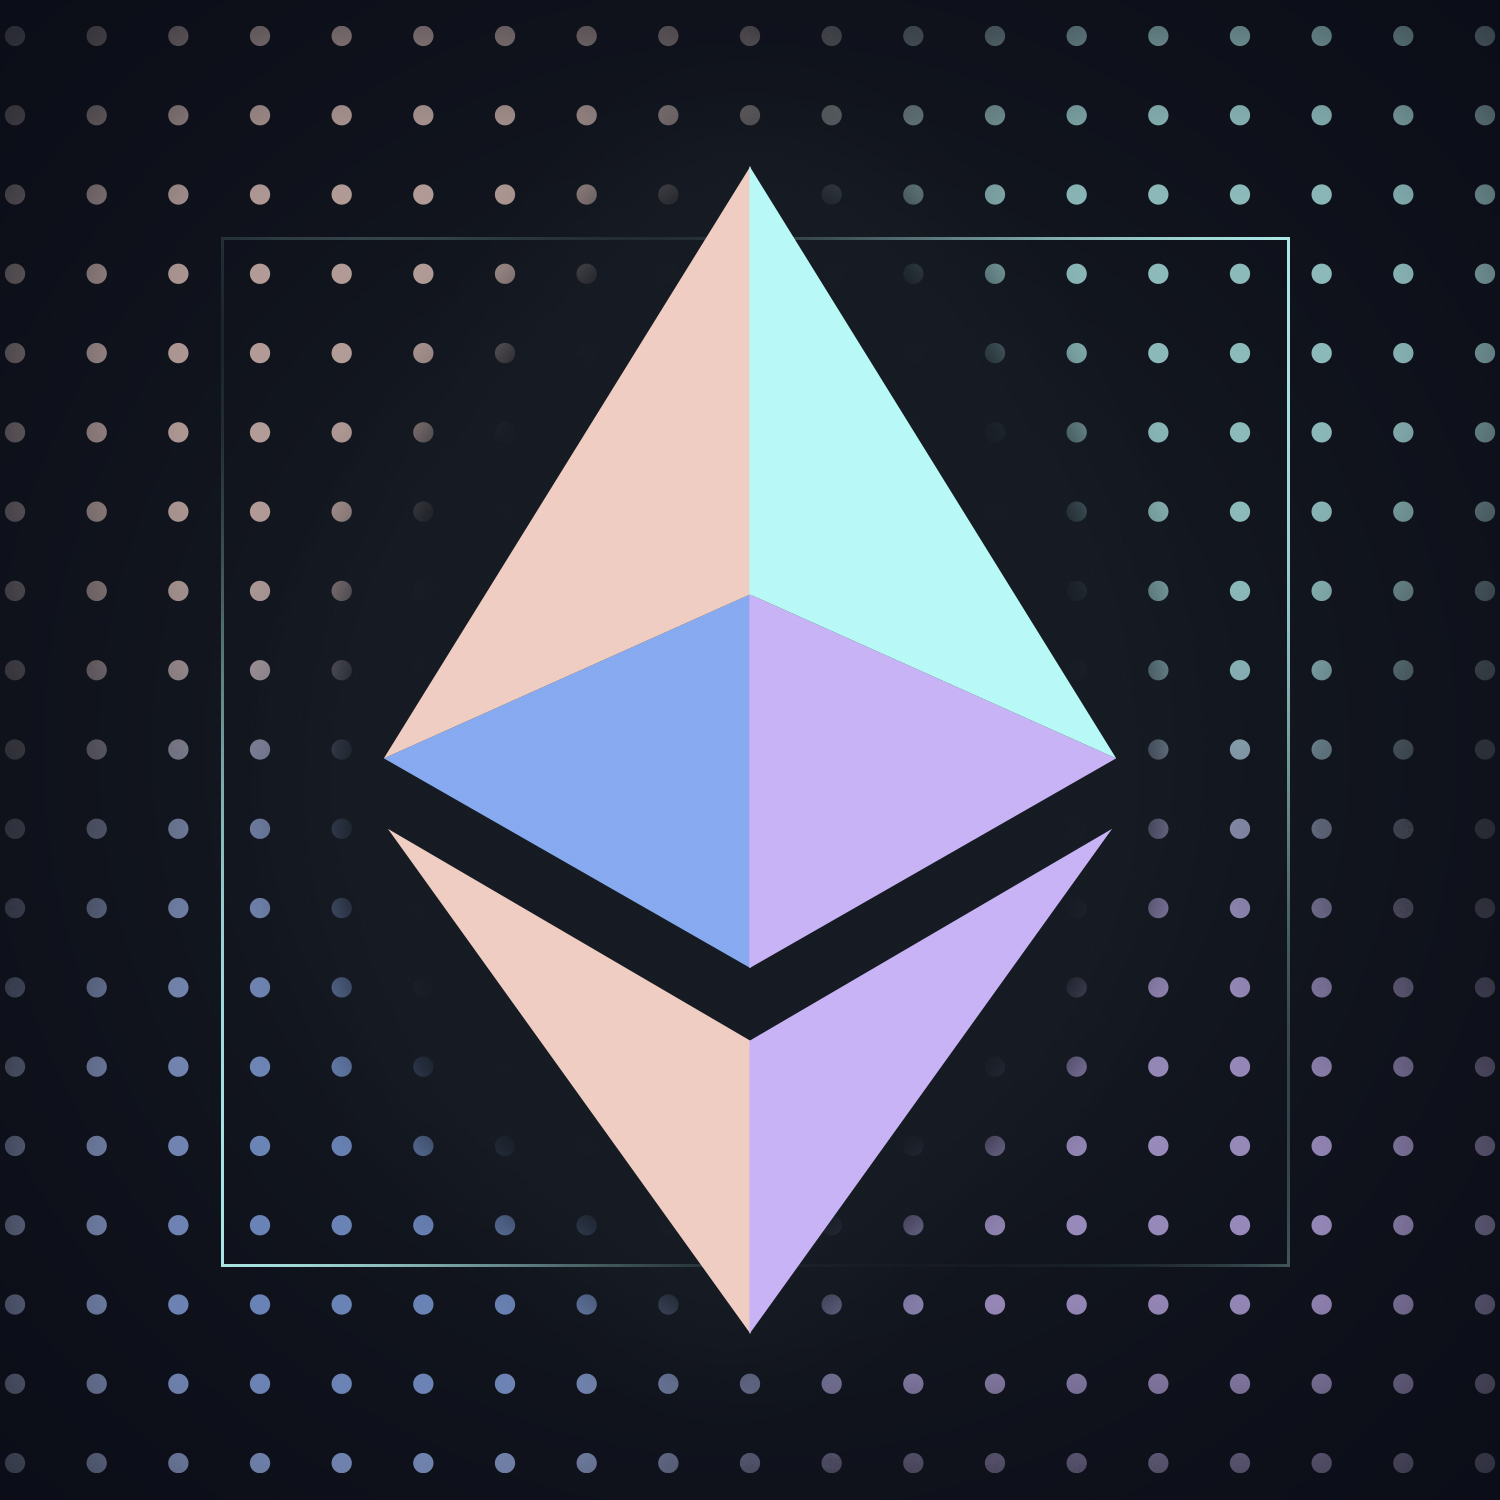 01Node Ethereum Staking Pool Powered By Dvt Is Live On Mainnet!!!